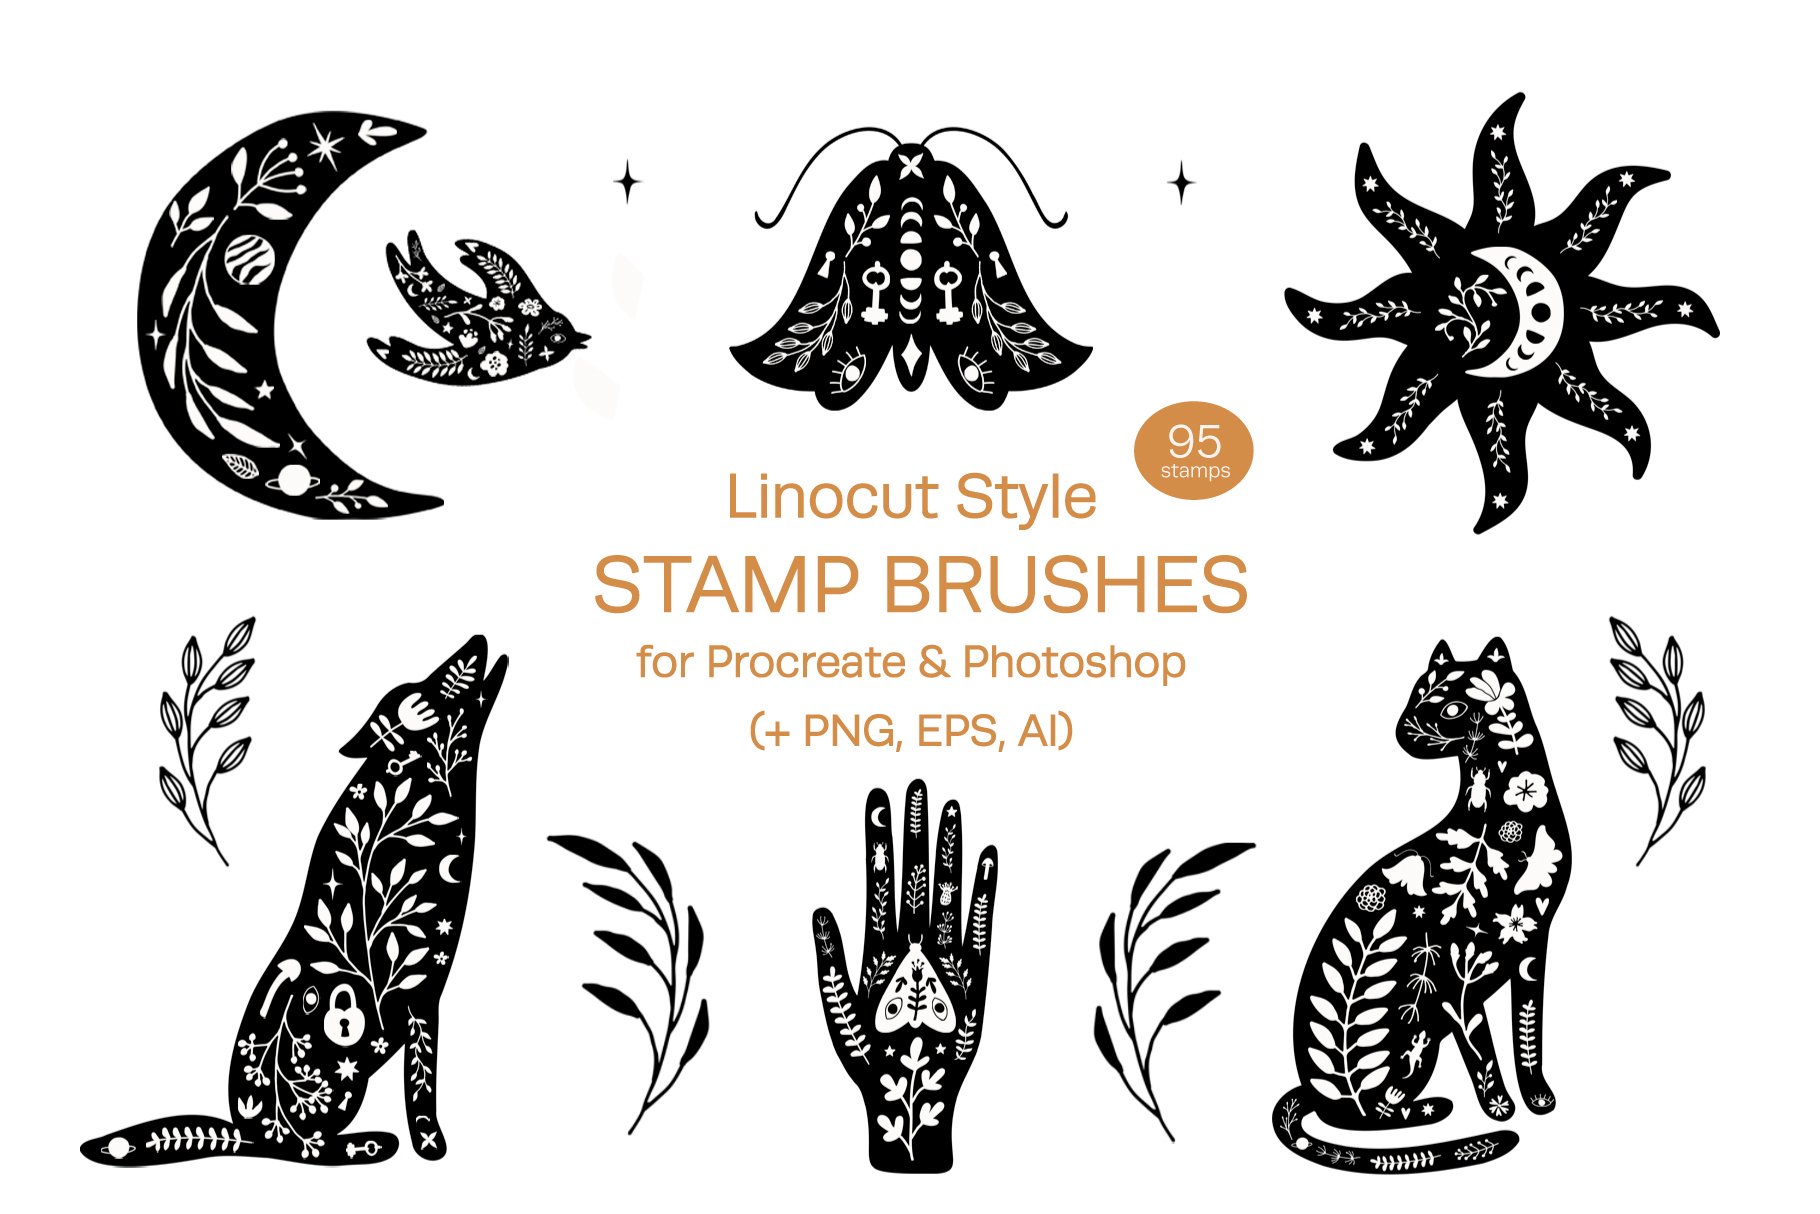 Create a Set of Art Brushes to Make a Linocut-Style Illustration